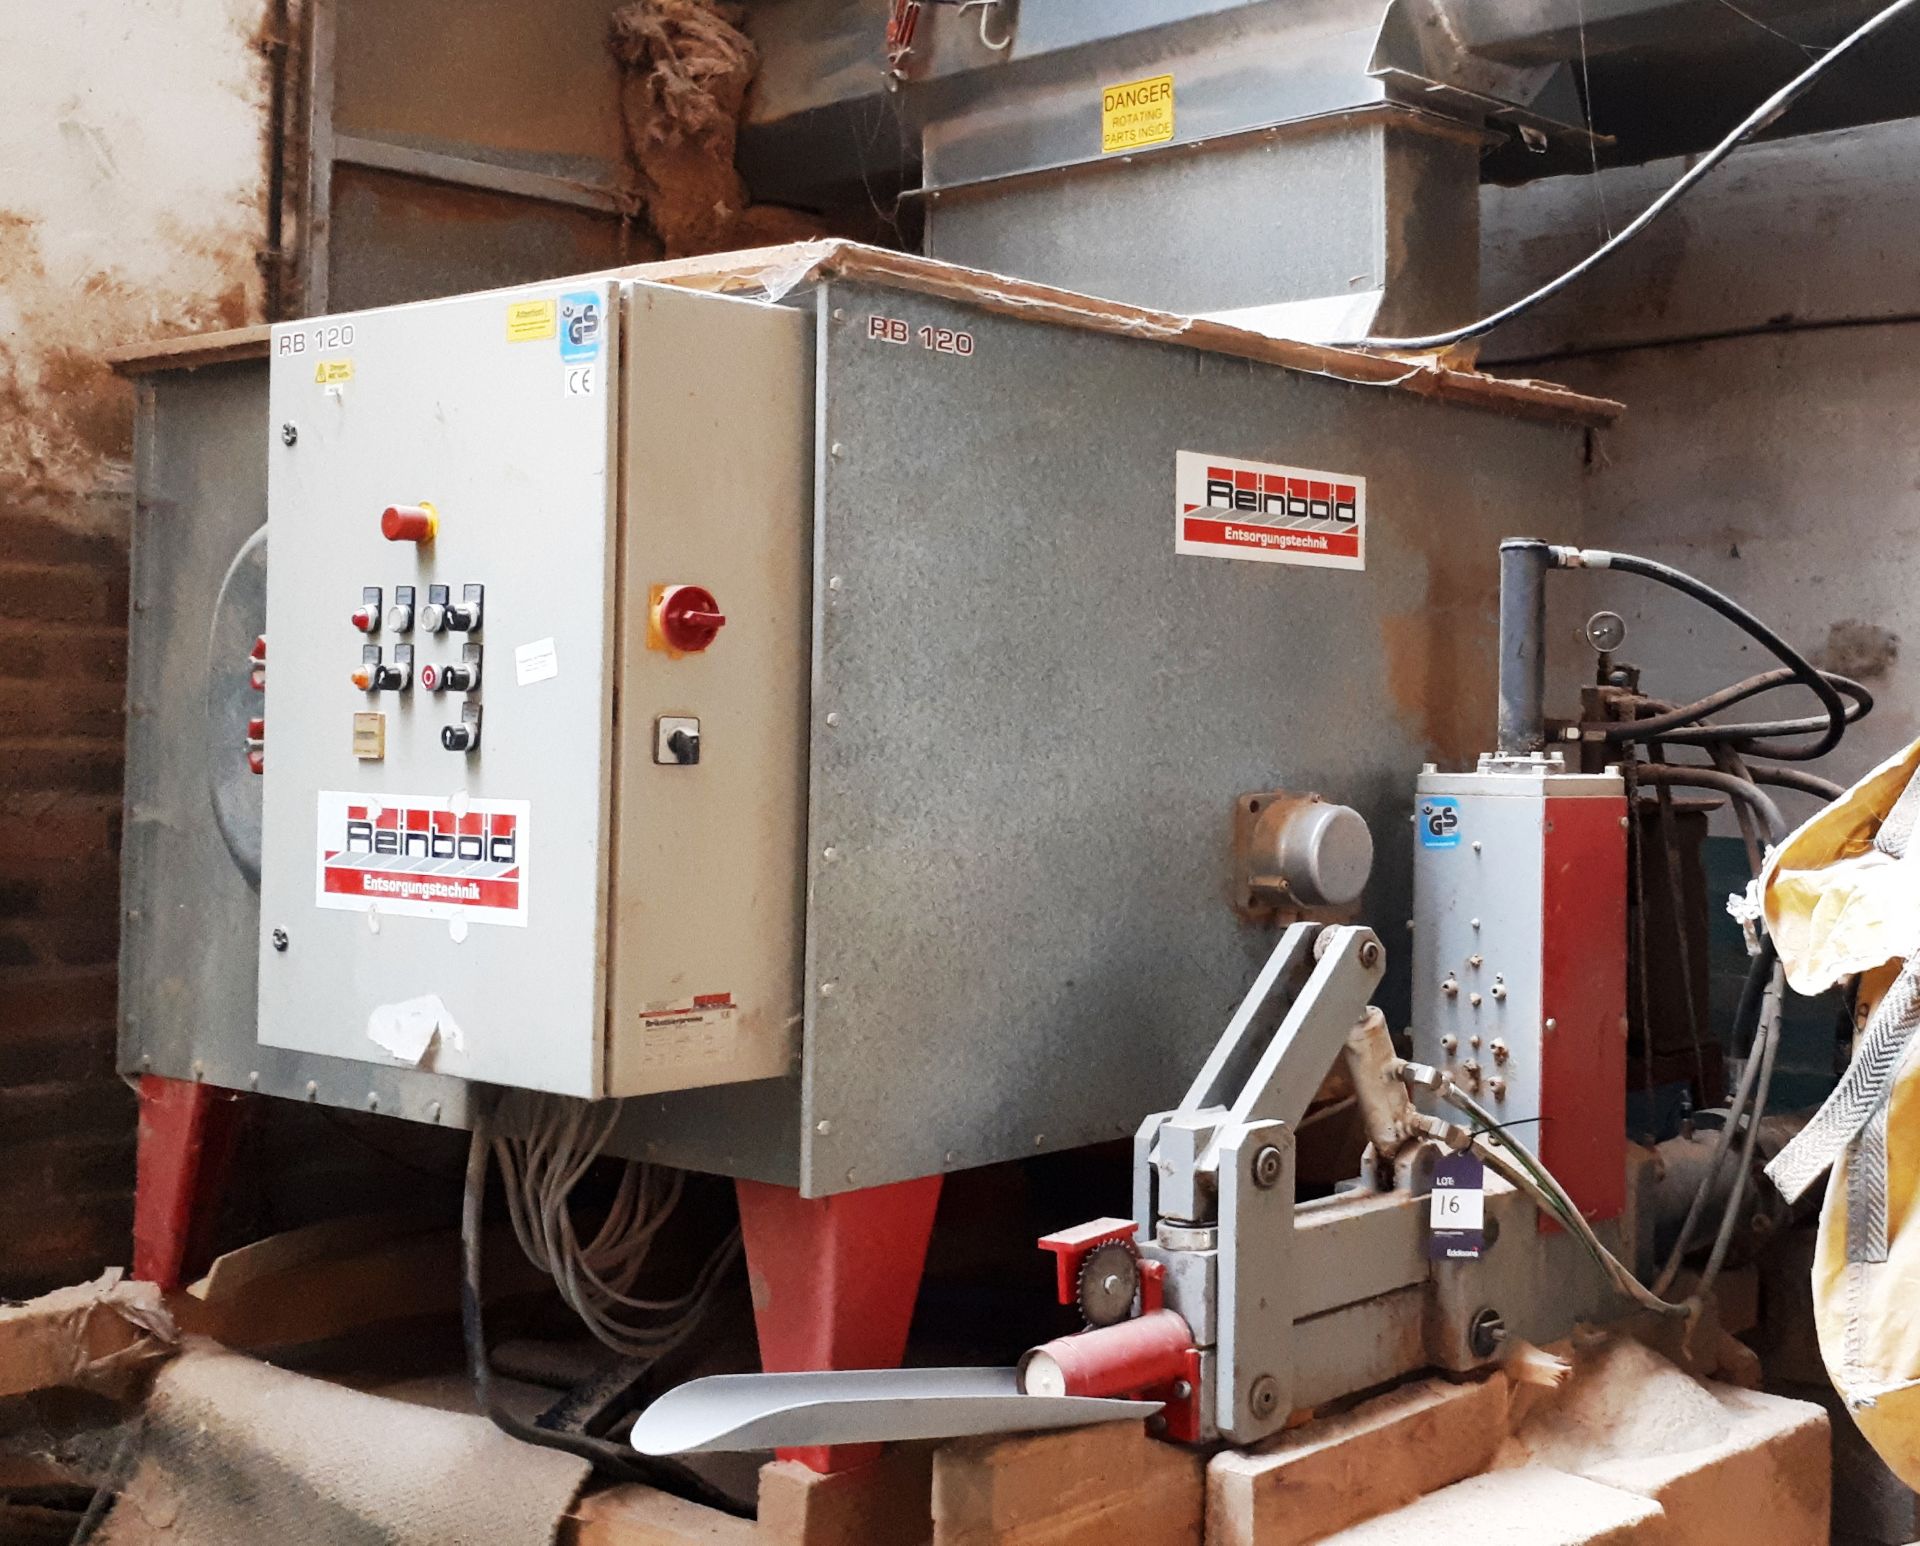 Reinbold RB120 briquette press, serial number 960-670 (2003) (Purchaser to disconnect at nearest